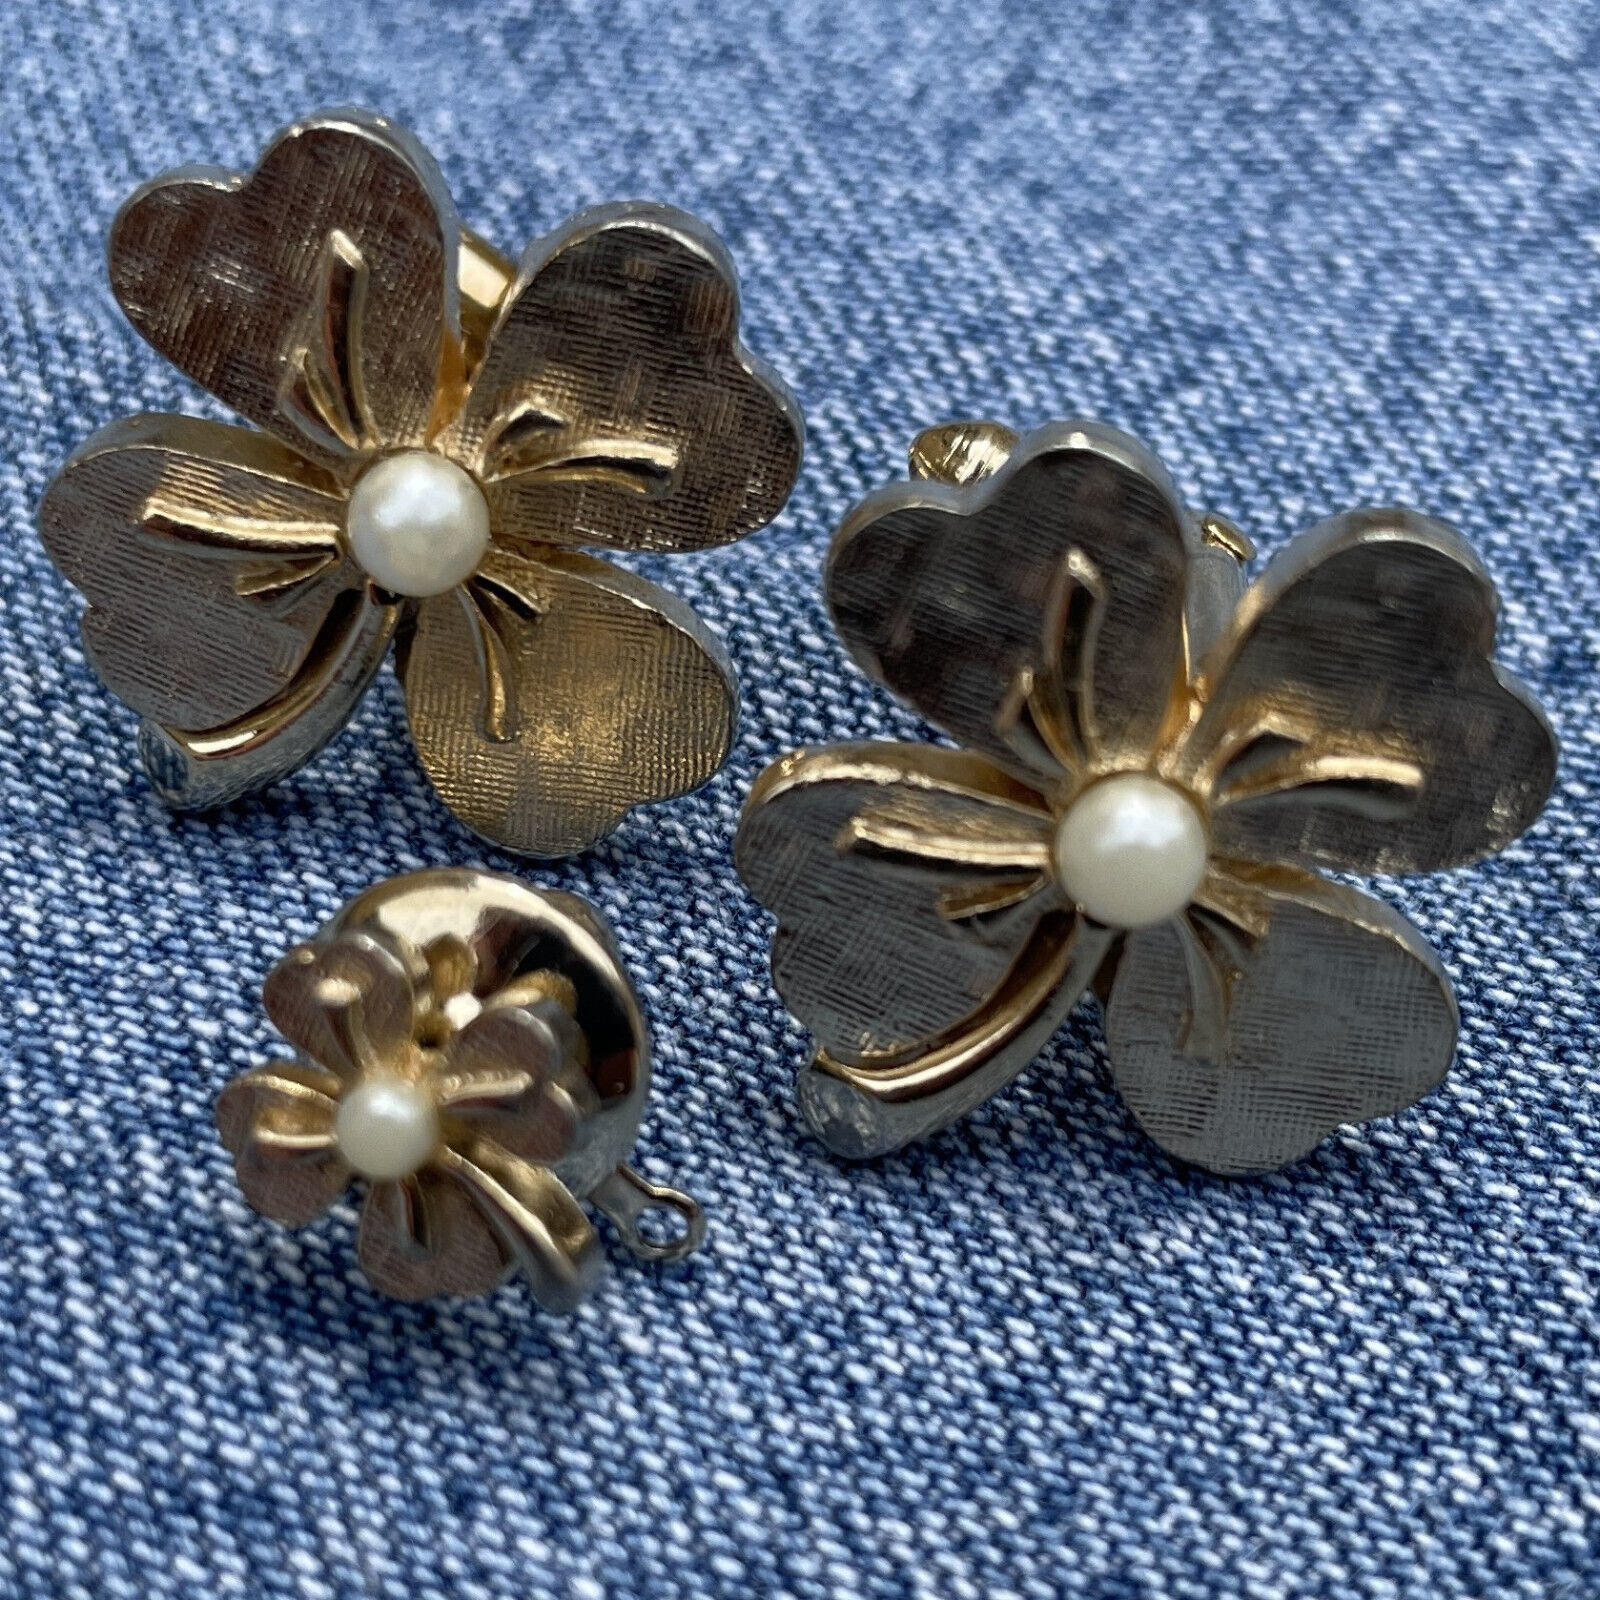 Primary image for Swank Four Leaf Clover Cufflings & Tie Tack with Tiny Faux Pearl